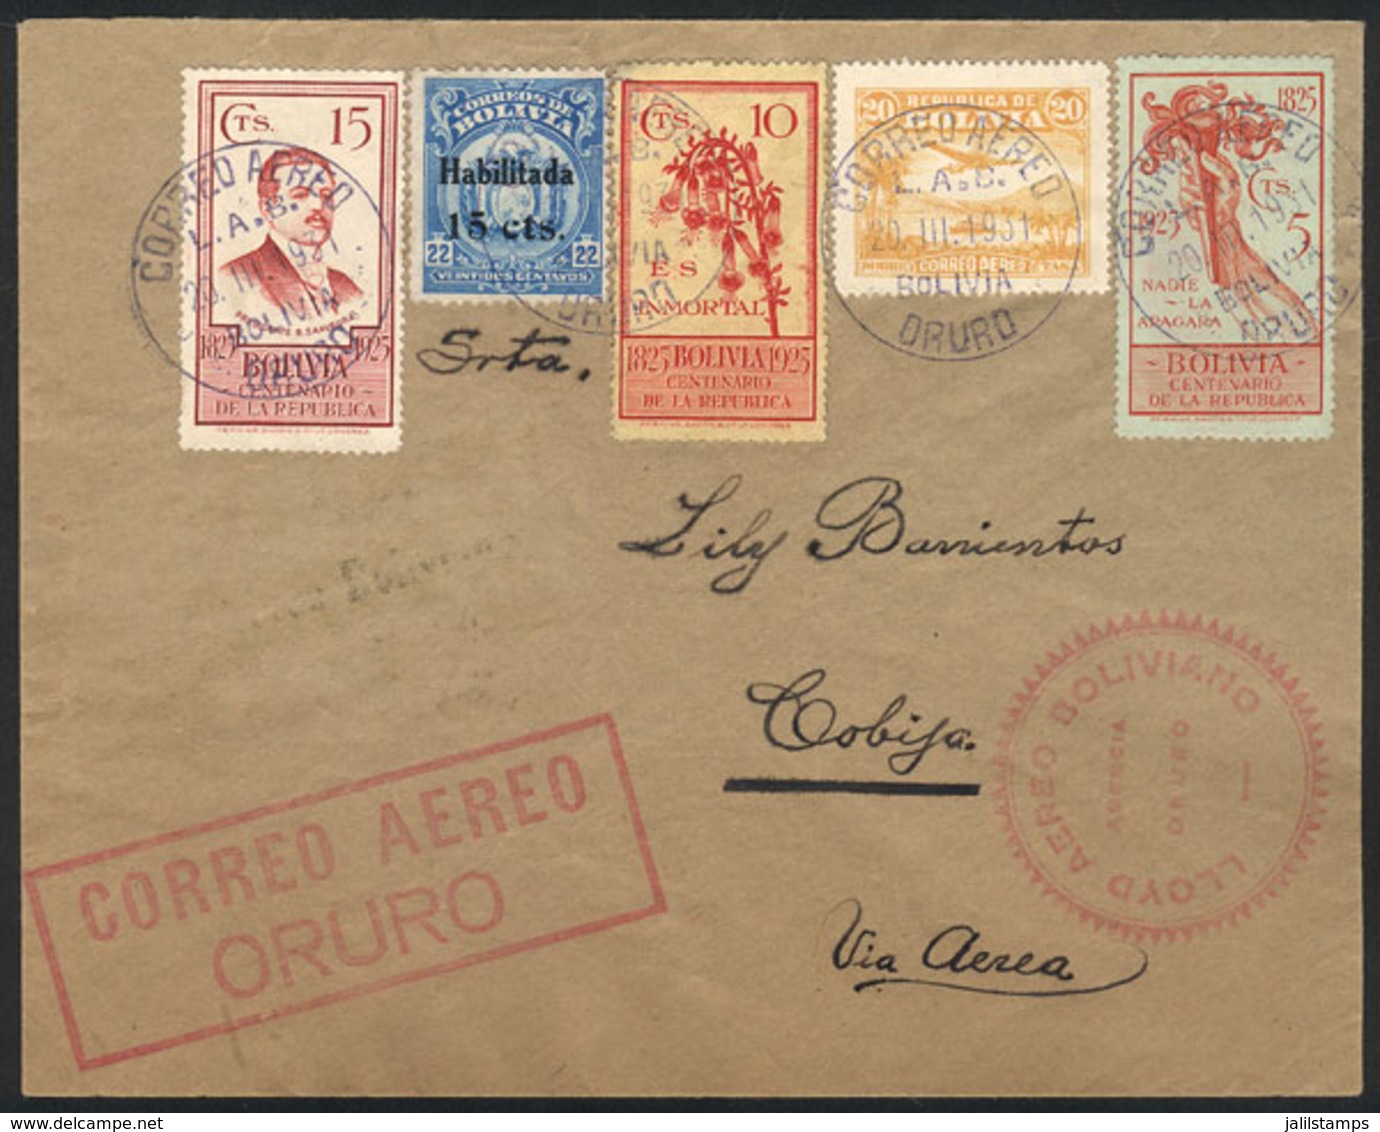 847 BOLIVIA: Cover Flown From Oruro To Riveralta On 20/MAR/1931 By LAB And From There To Final Destination (Cobija) By L - Bolivië